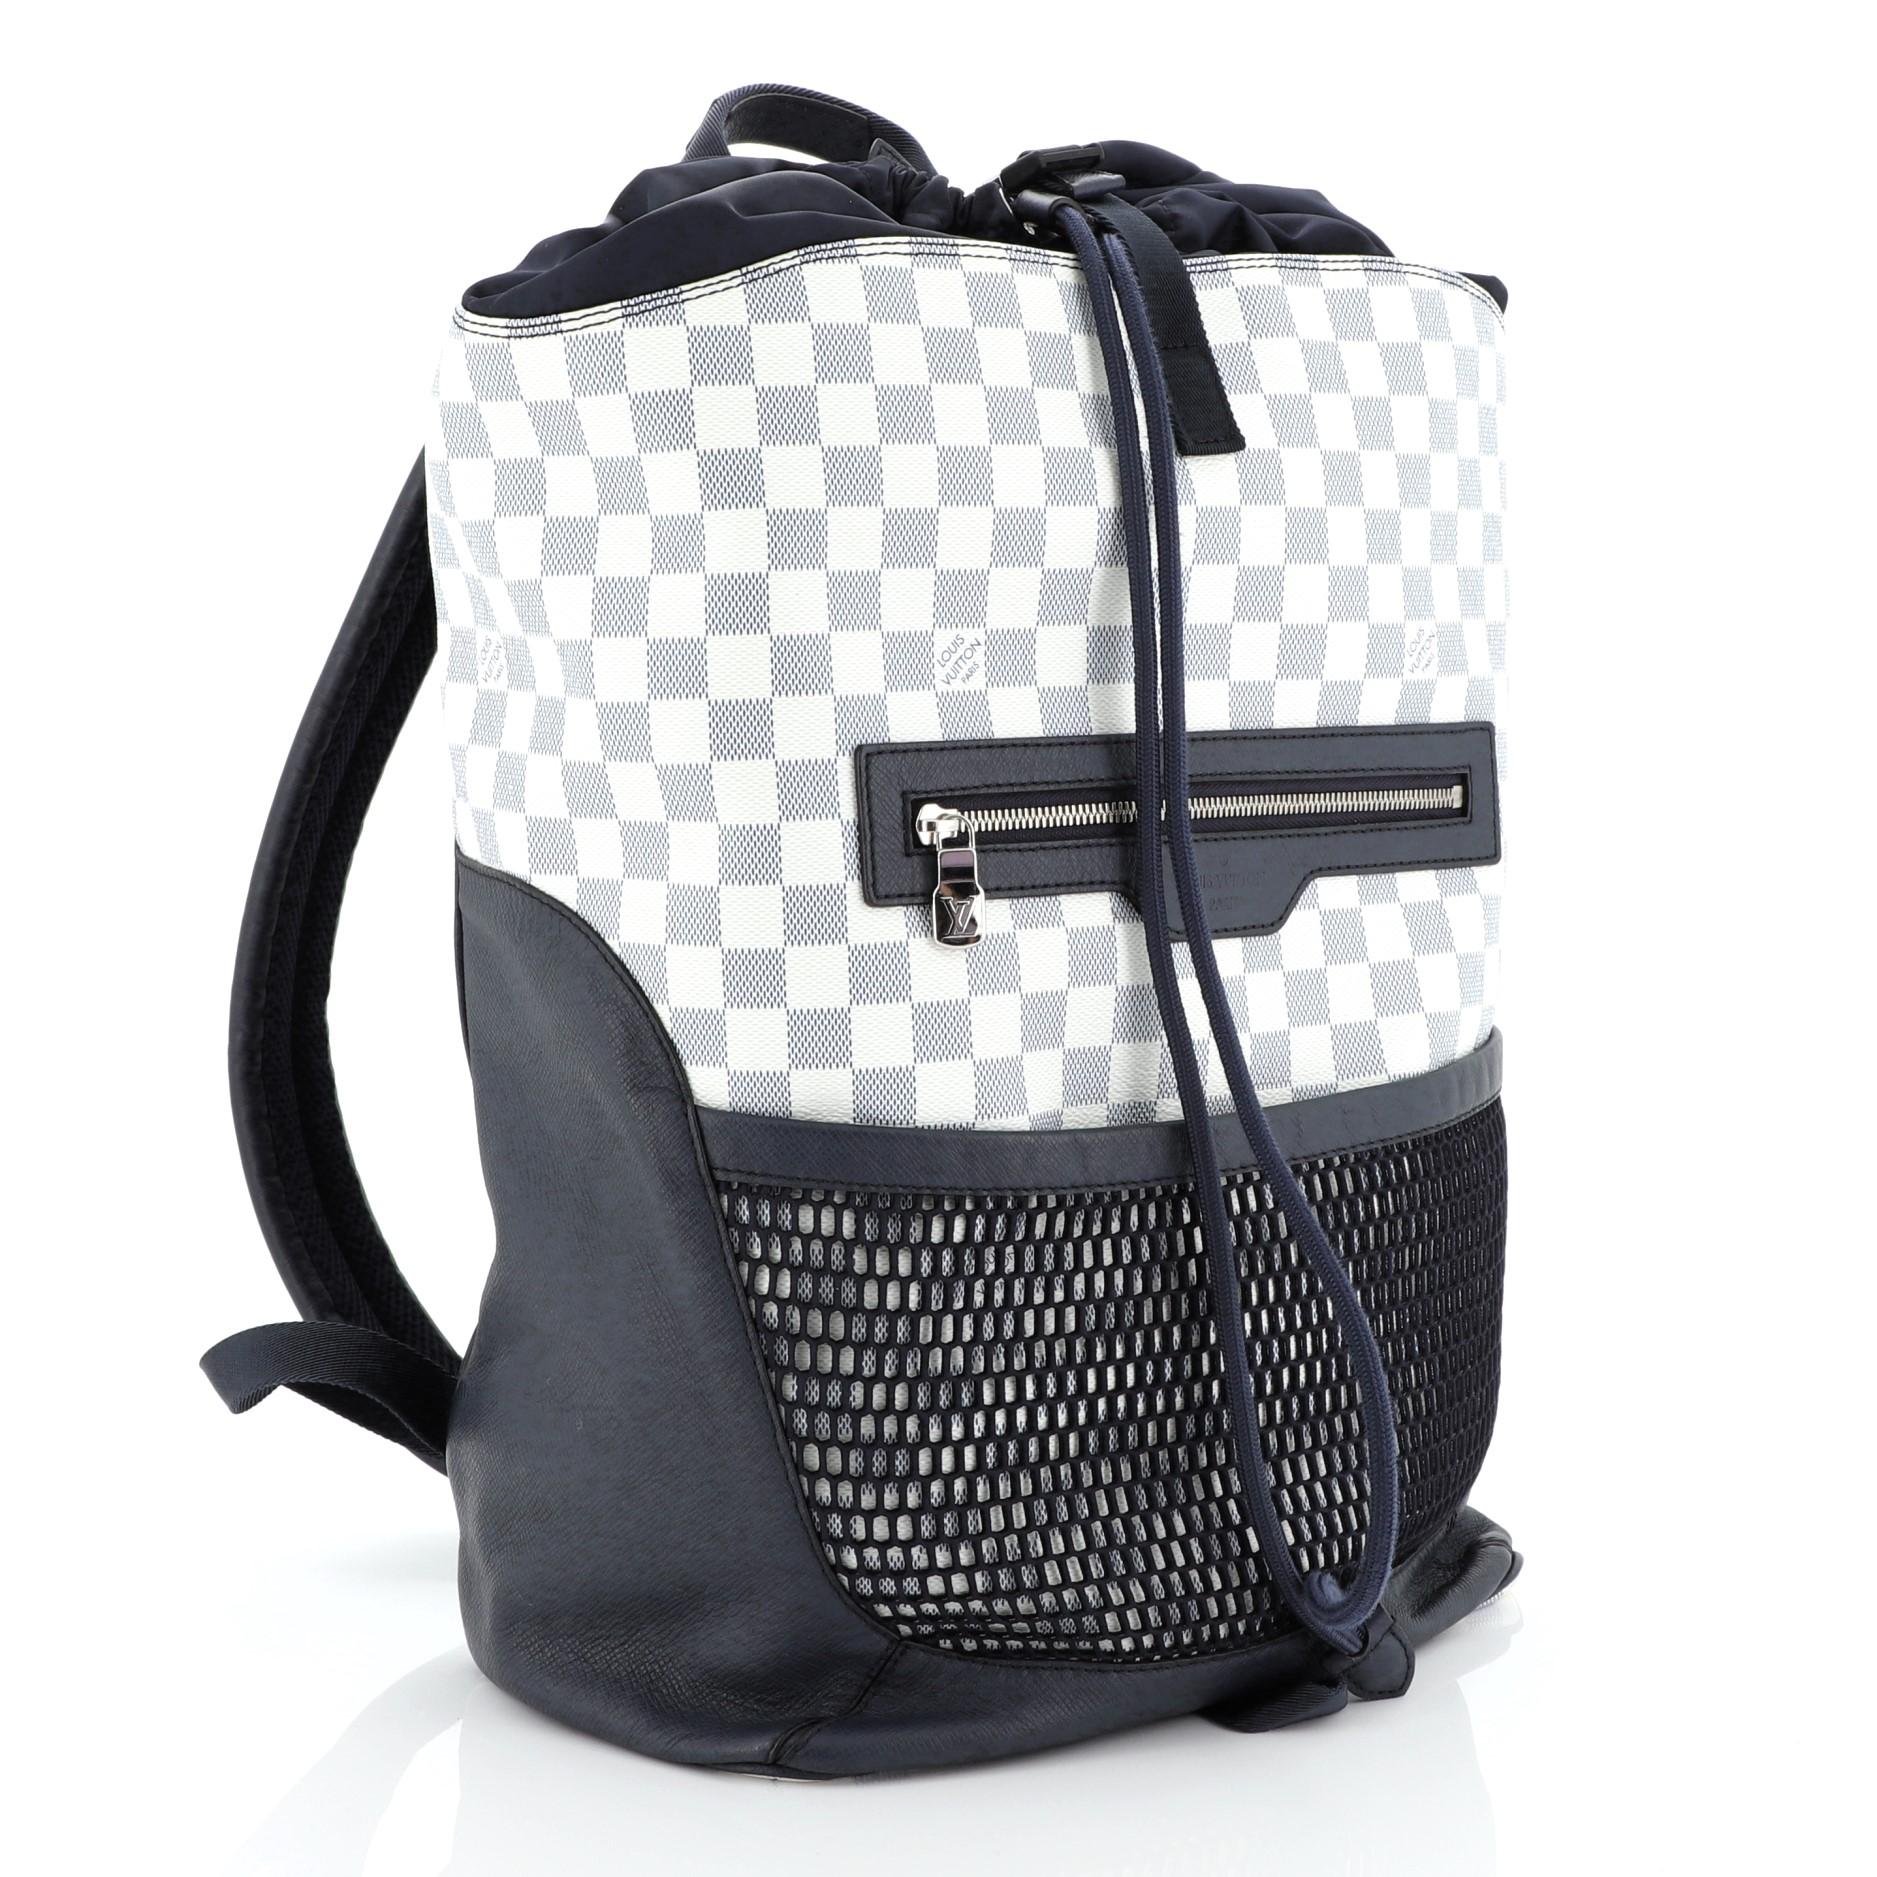 This Louis Vuitton Matchpoint Backpack Damier Coastline, crafted in damie azur coated canvas and blue leather and nylon, features a top handle, backpack straps, exterior front zip pocket, front mesh pocket and silver-tone hardware. It opens to a